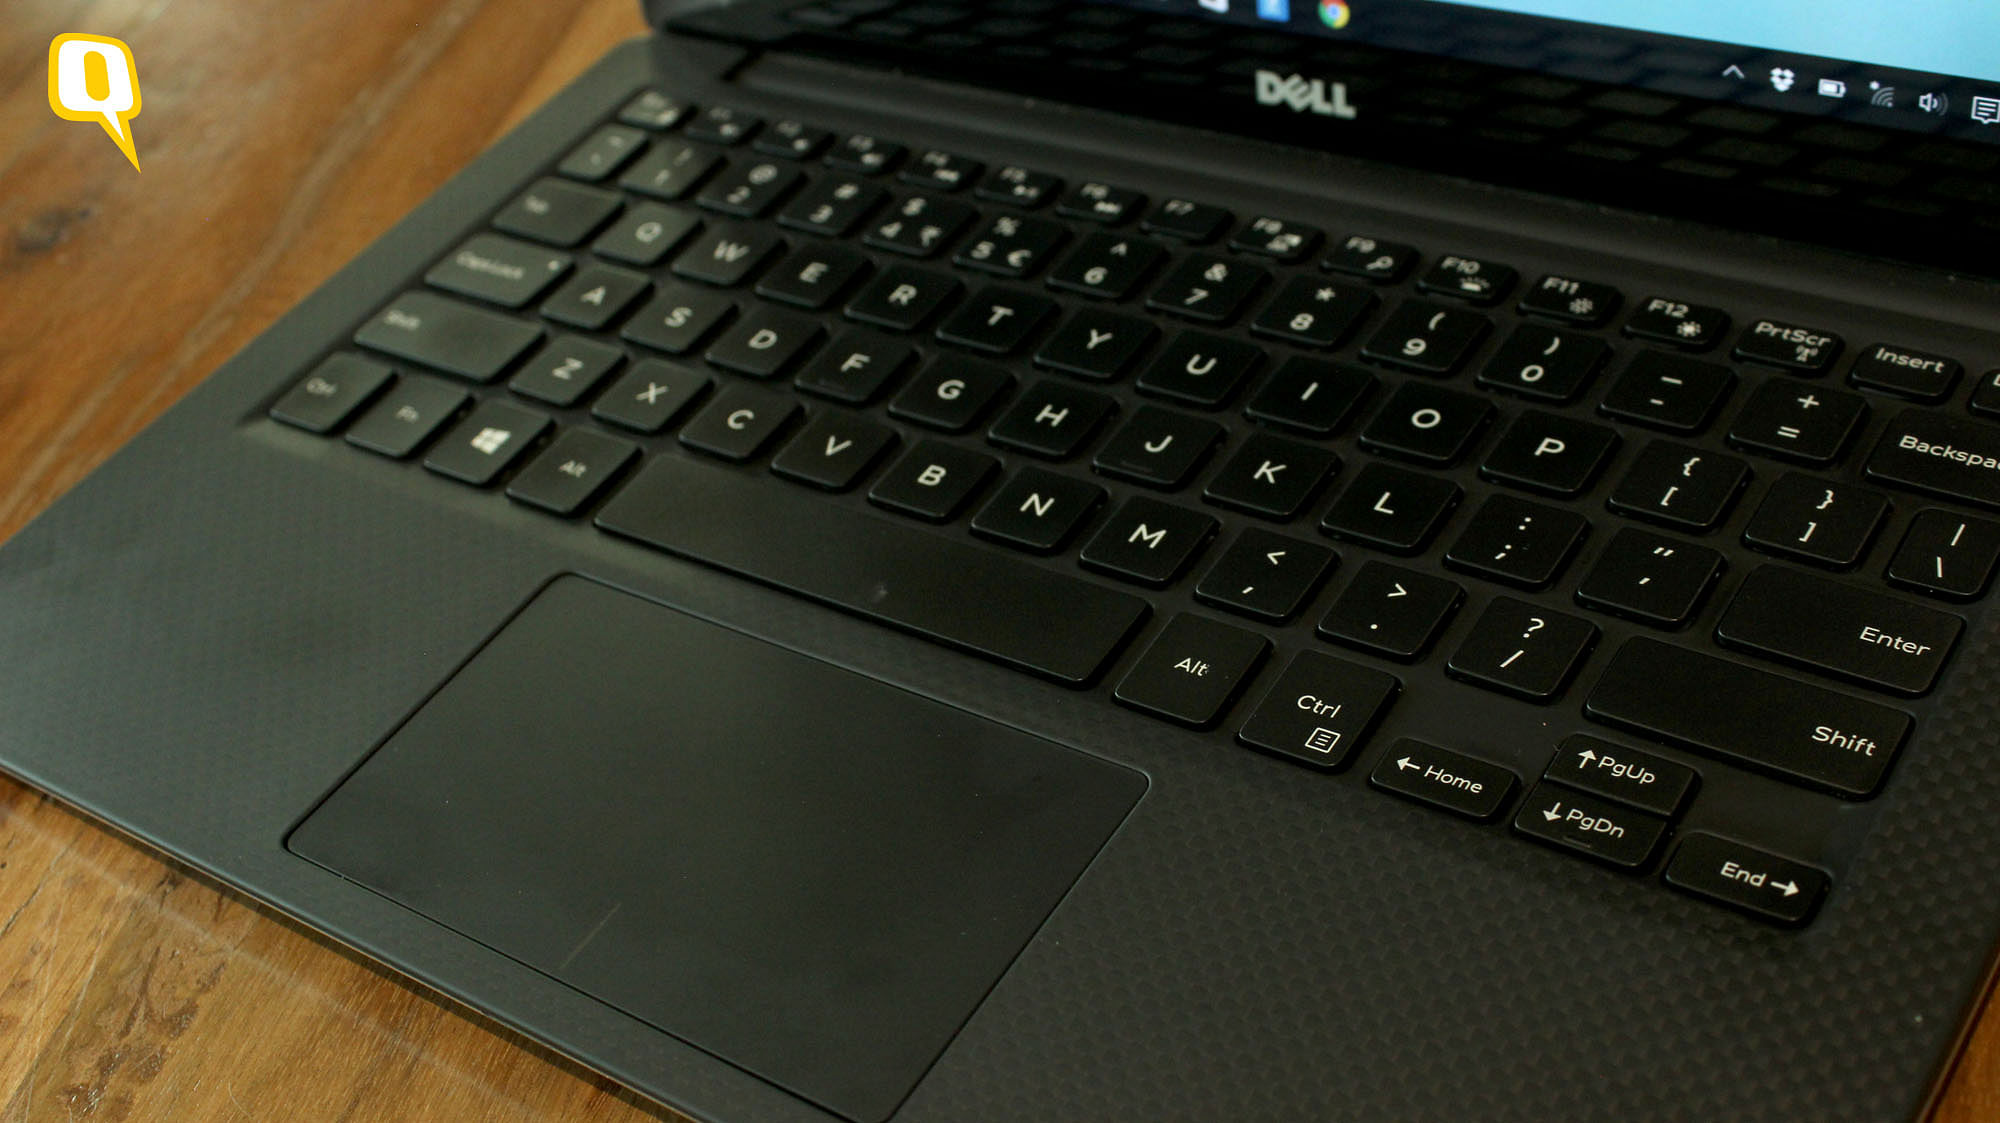 Review: Dell XPS 13 Is the Best Windows Laptop Money Can Buy!